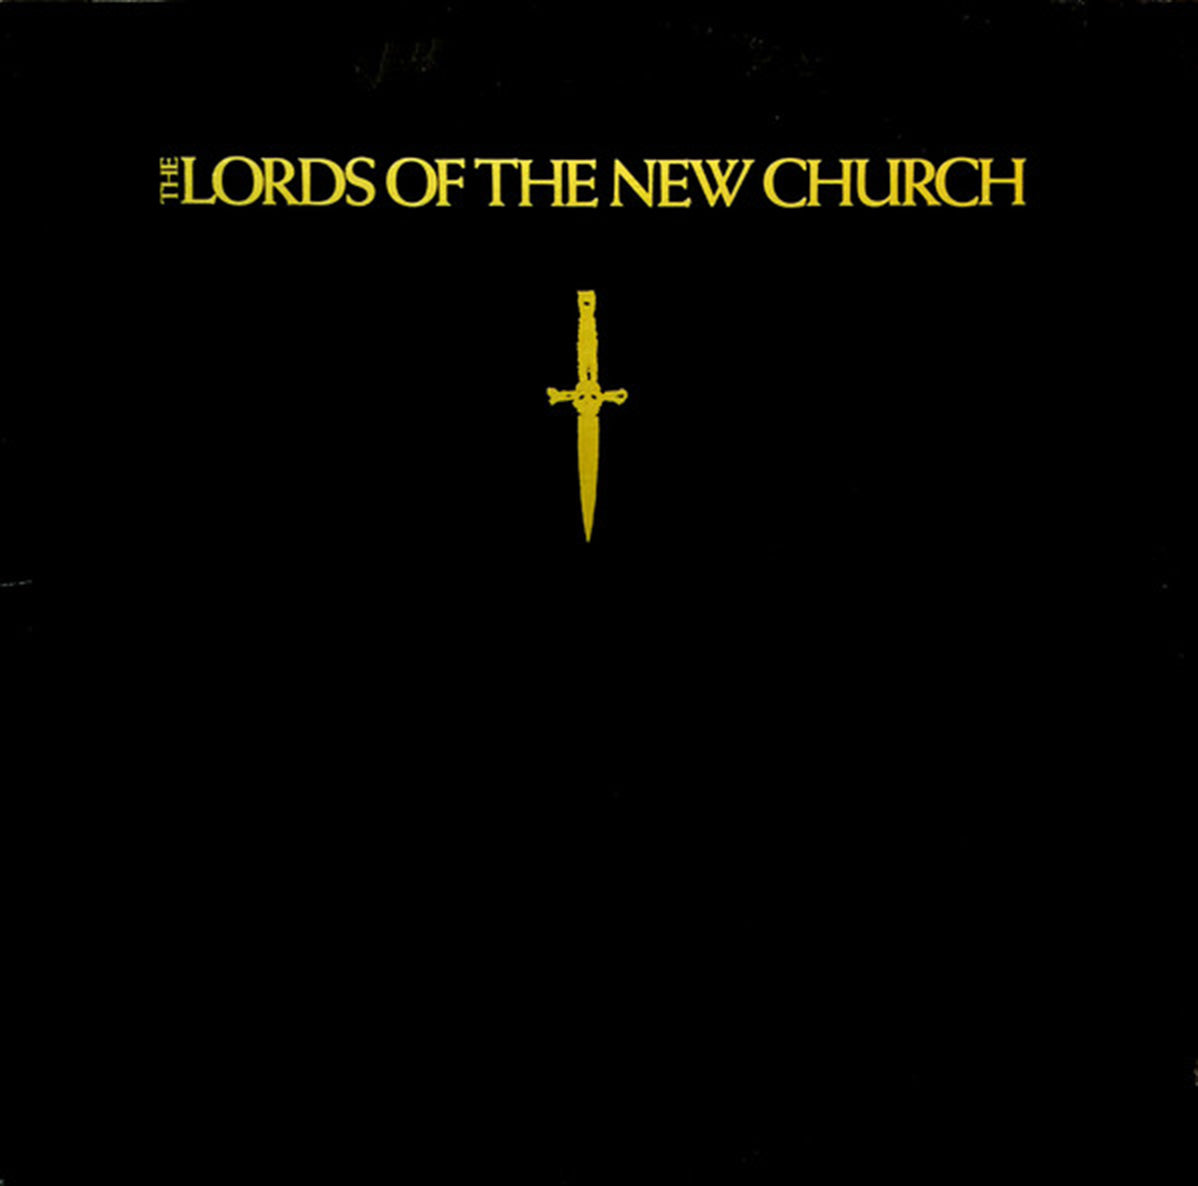 The Lords Of The New Church – The Lords Of The New Church - 1982